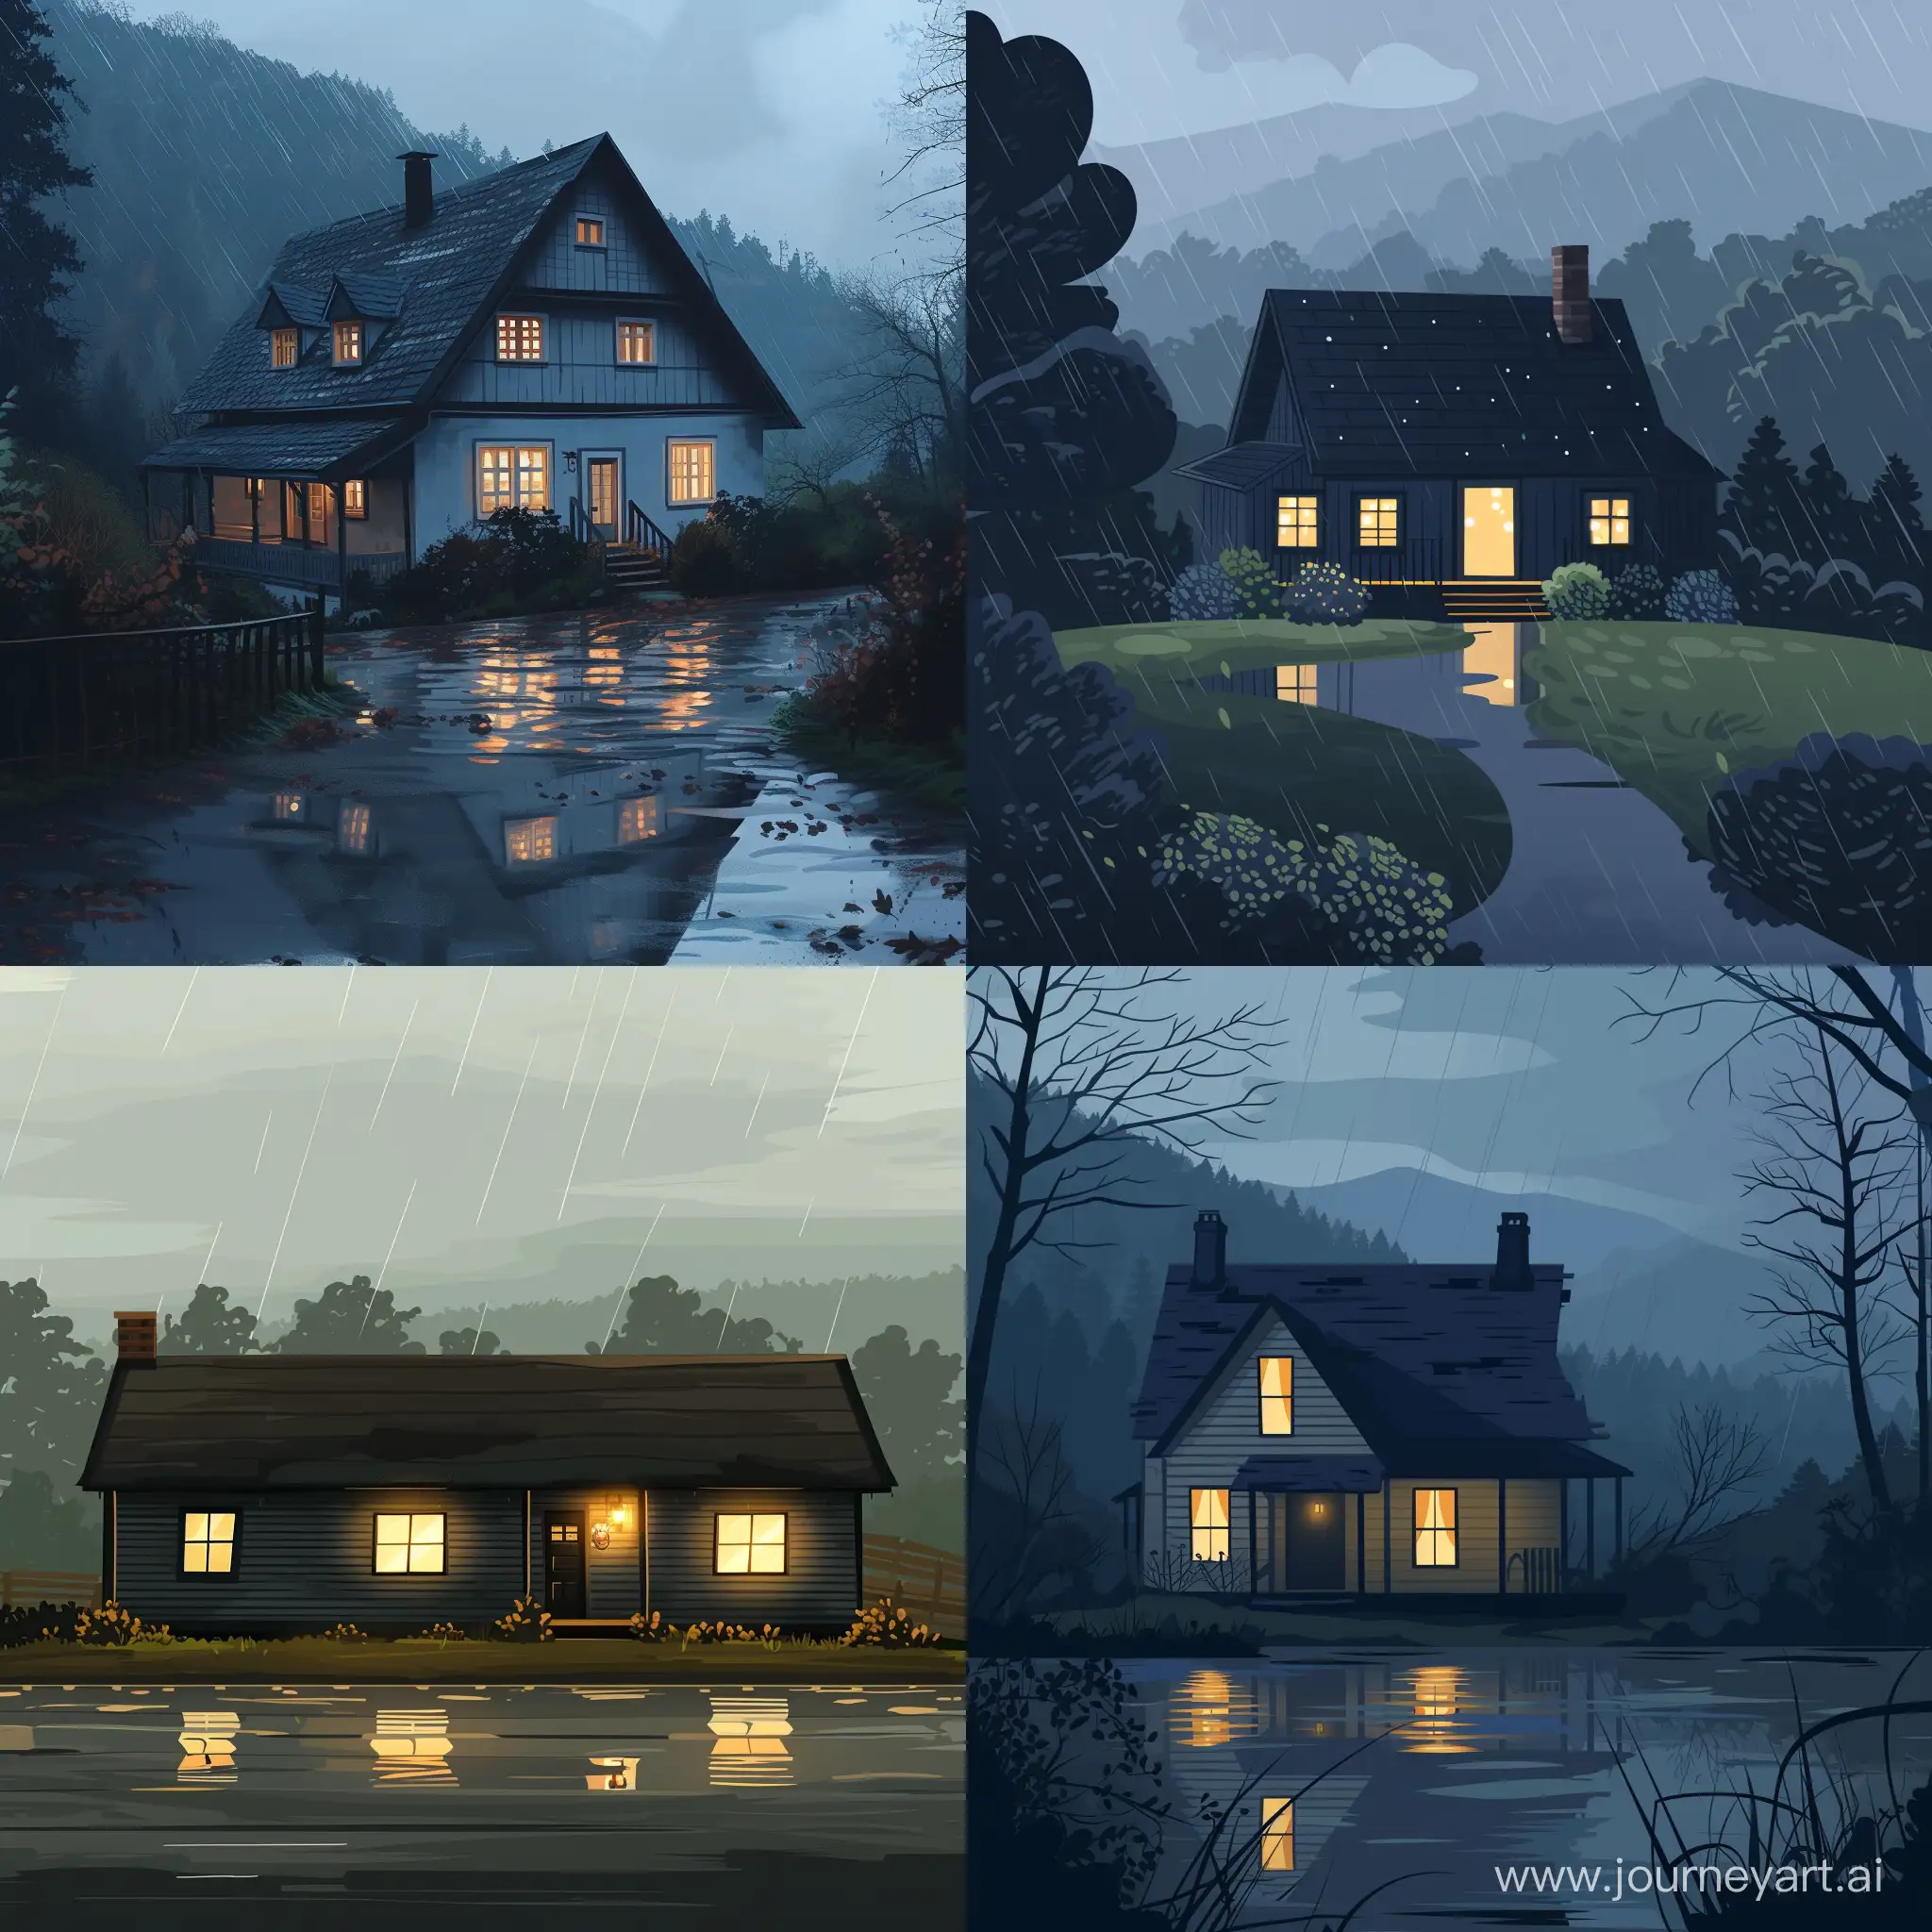 Rainy-Evening-at-Mountain-Cottage-Cozy-Lights-and-Wet-Surroundings